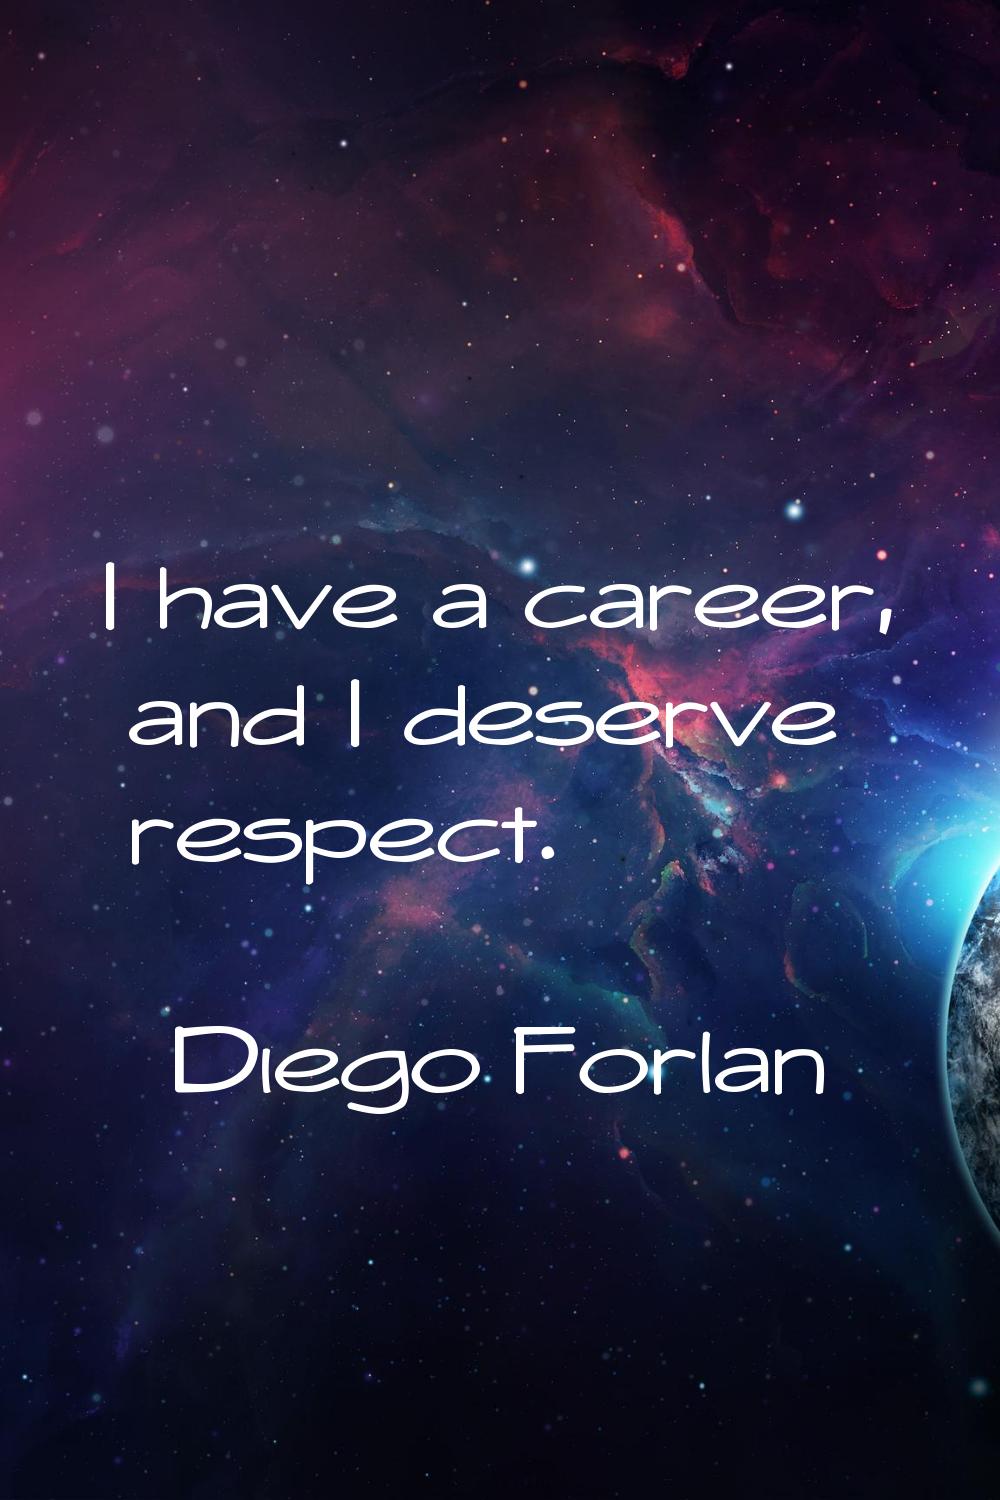 I have a career, and I deserve respect.